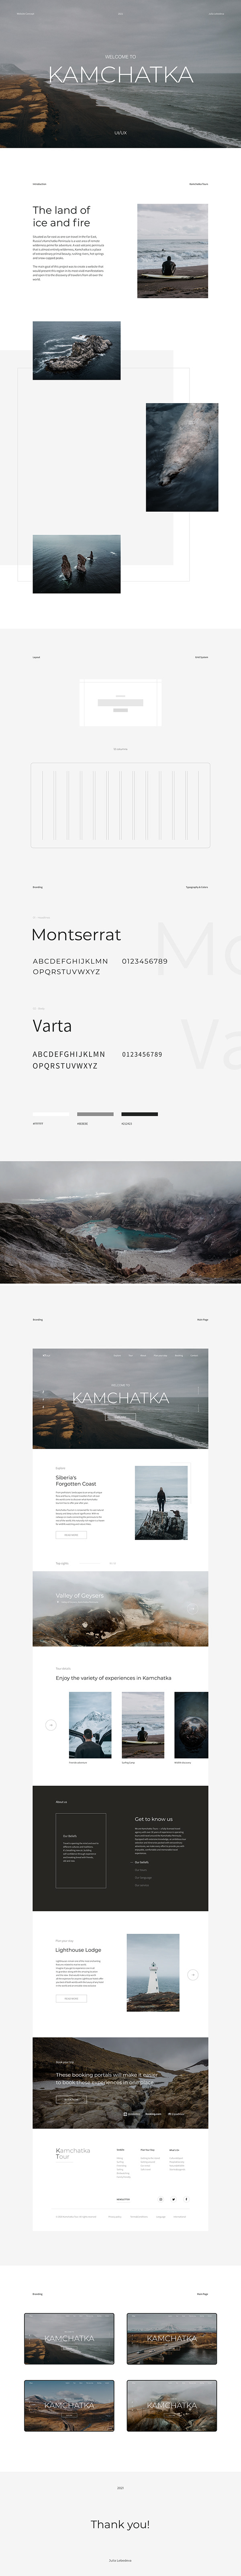 Welcome to Kamchatka / Travel Agency Website Concept